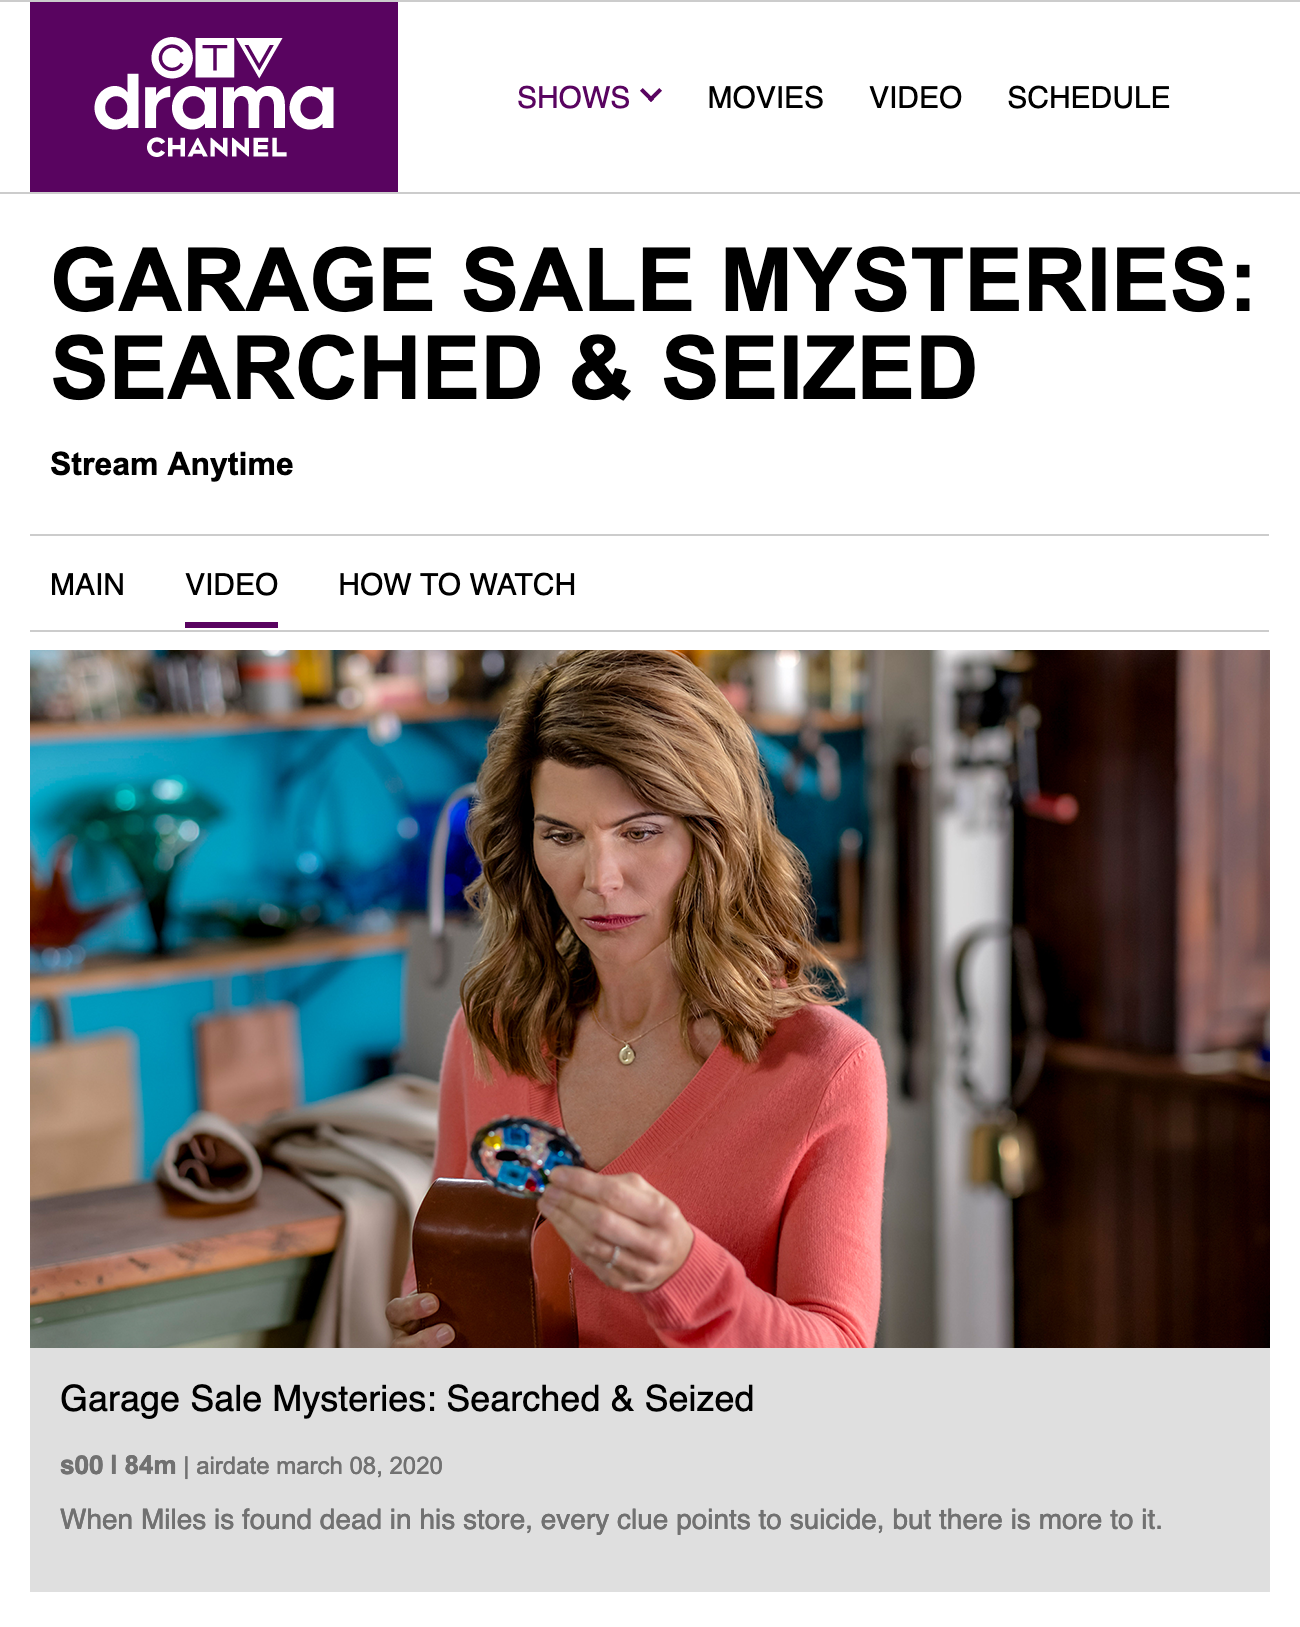 GARAGE SALE MYSTERIES #16 (Searched & Seized): Airing on CTV Drama